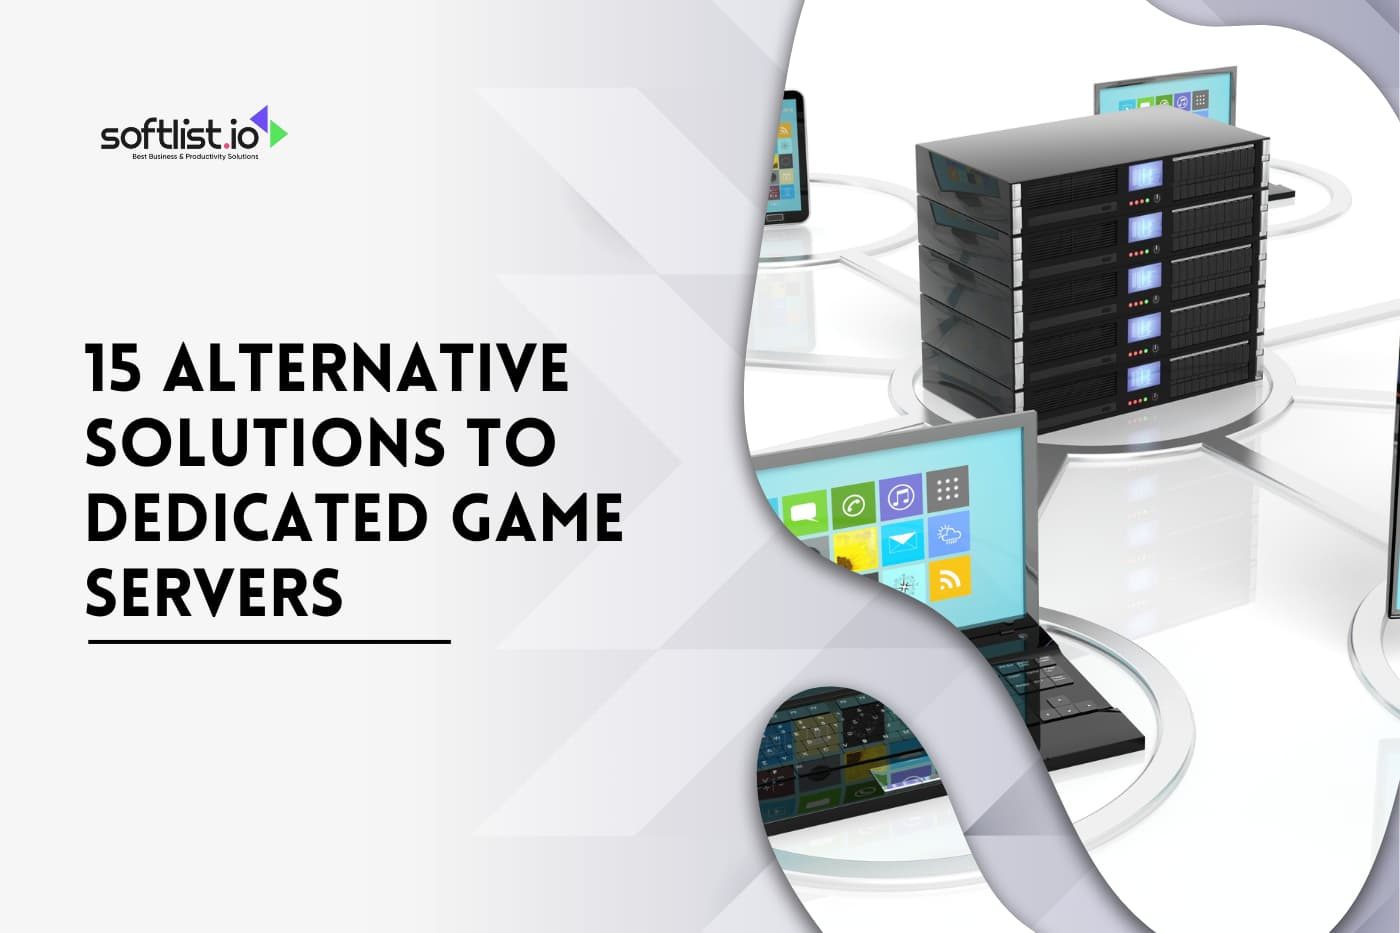 15 Alternative Solutions to Dedicated Game Servers